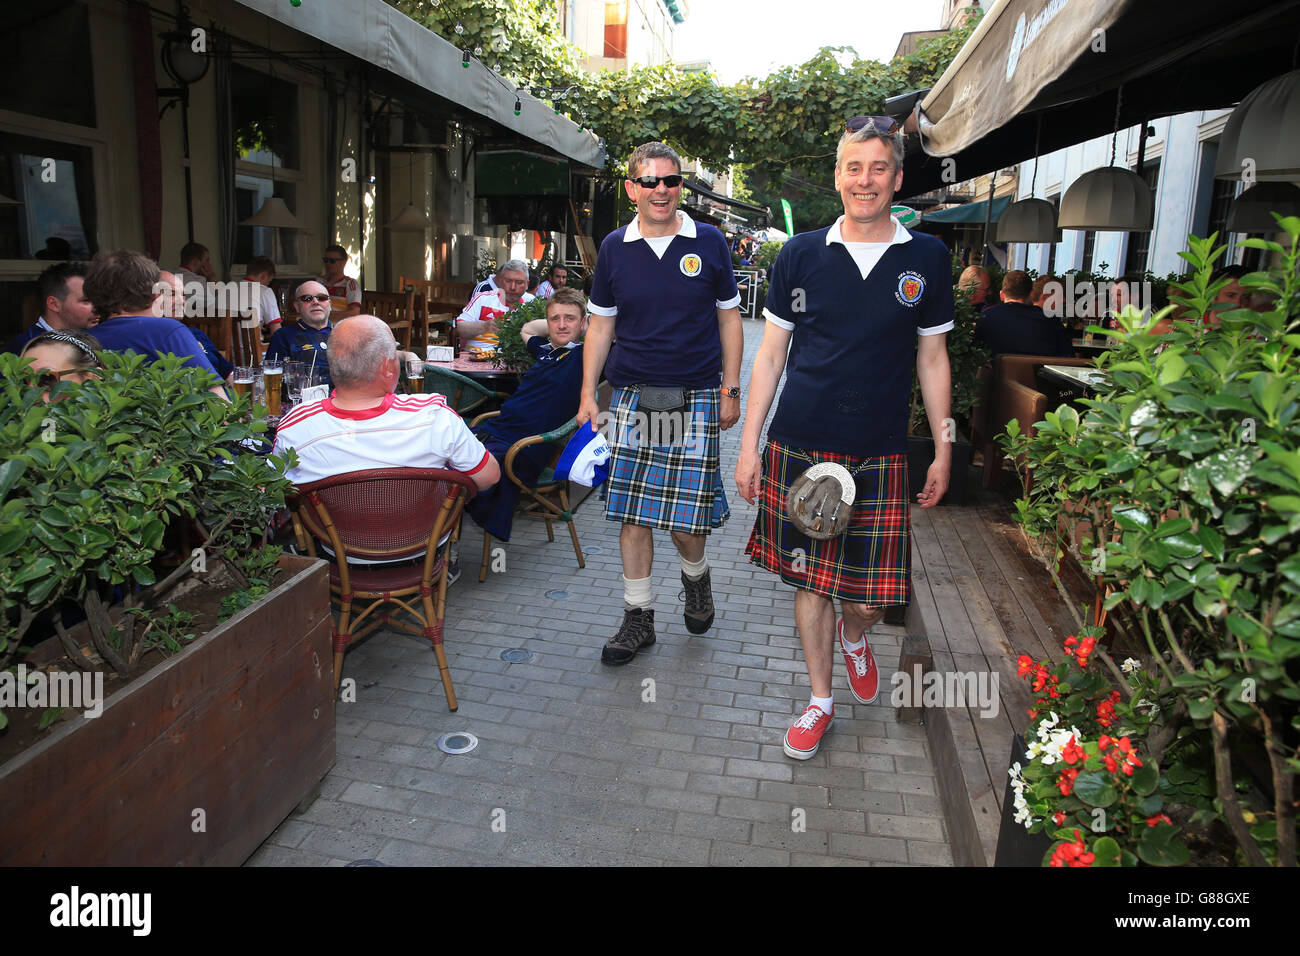 Scotland fans in bars and restaurants in Tbilisi prior to the UEFA European Championship Qualifying match at the Boris Paichadze Dinamo Arena, Tbilisi. Picture date: Friday September 4, 2015. See PA story SOCCER Georgia. Photo credit should read: Nick Potts/PA Wire. RESTRICTIONS: Use subject to restrictions. . Commercial use only with prior written consent of the Scottish FA. Call +44 (0)1158 447447 for further information. Stock Photo